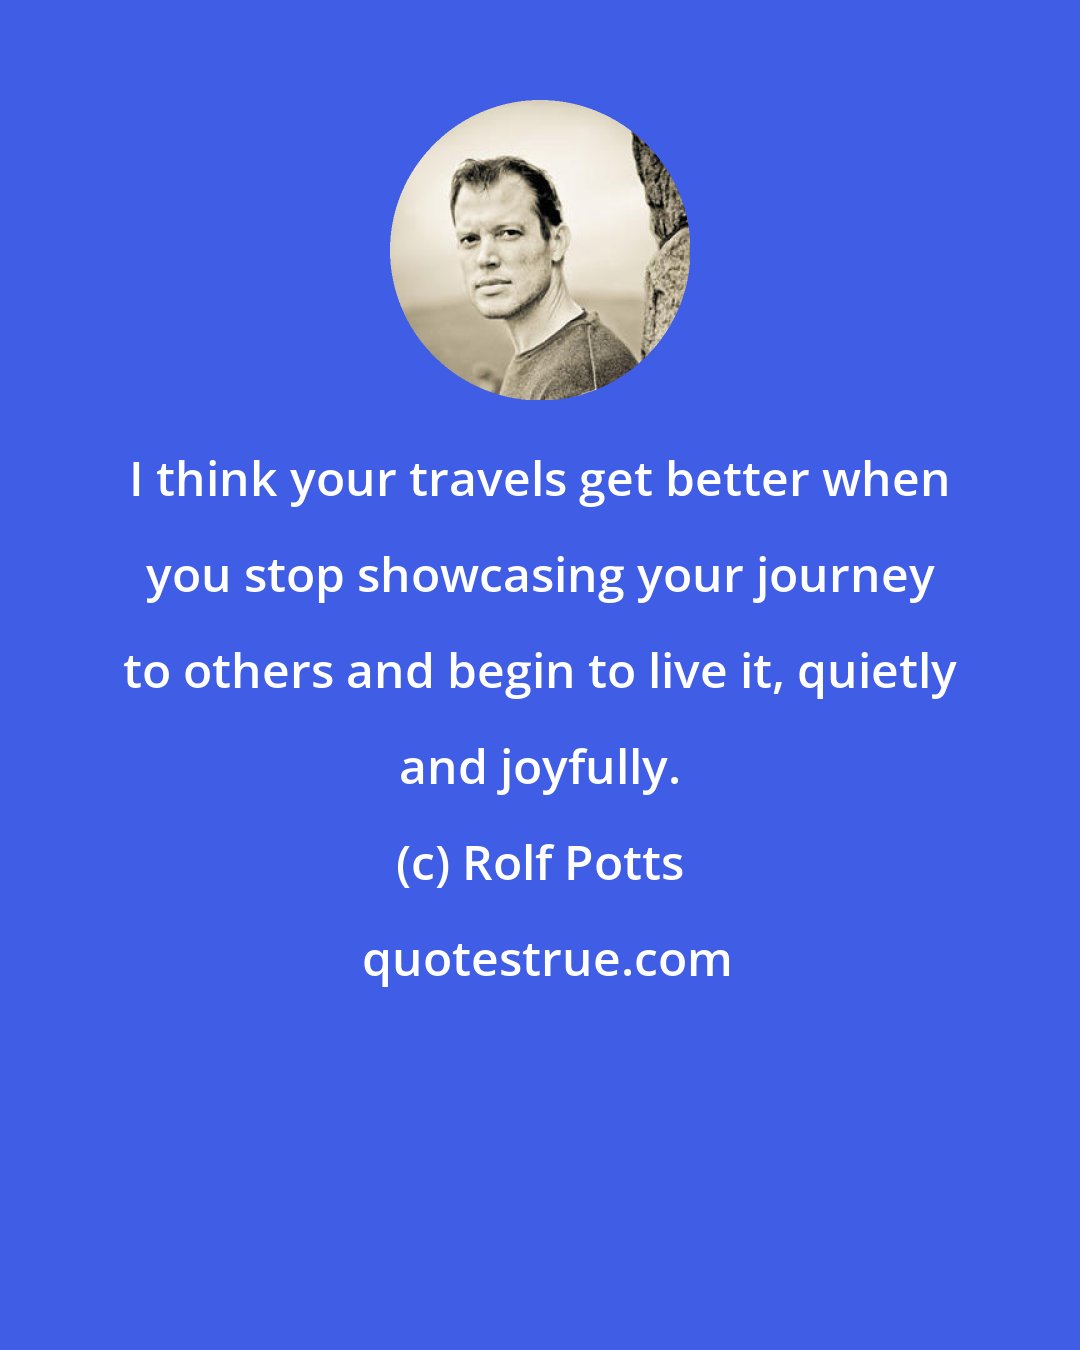 Rolf Potts: I think your travels get better when you stop showcasing your journey to others and begin to live it, quietly and joyfully.